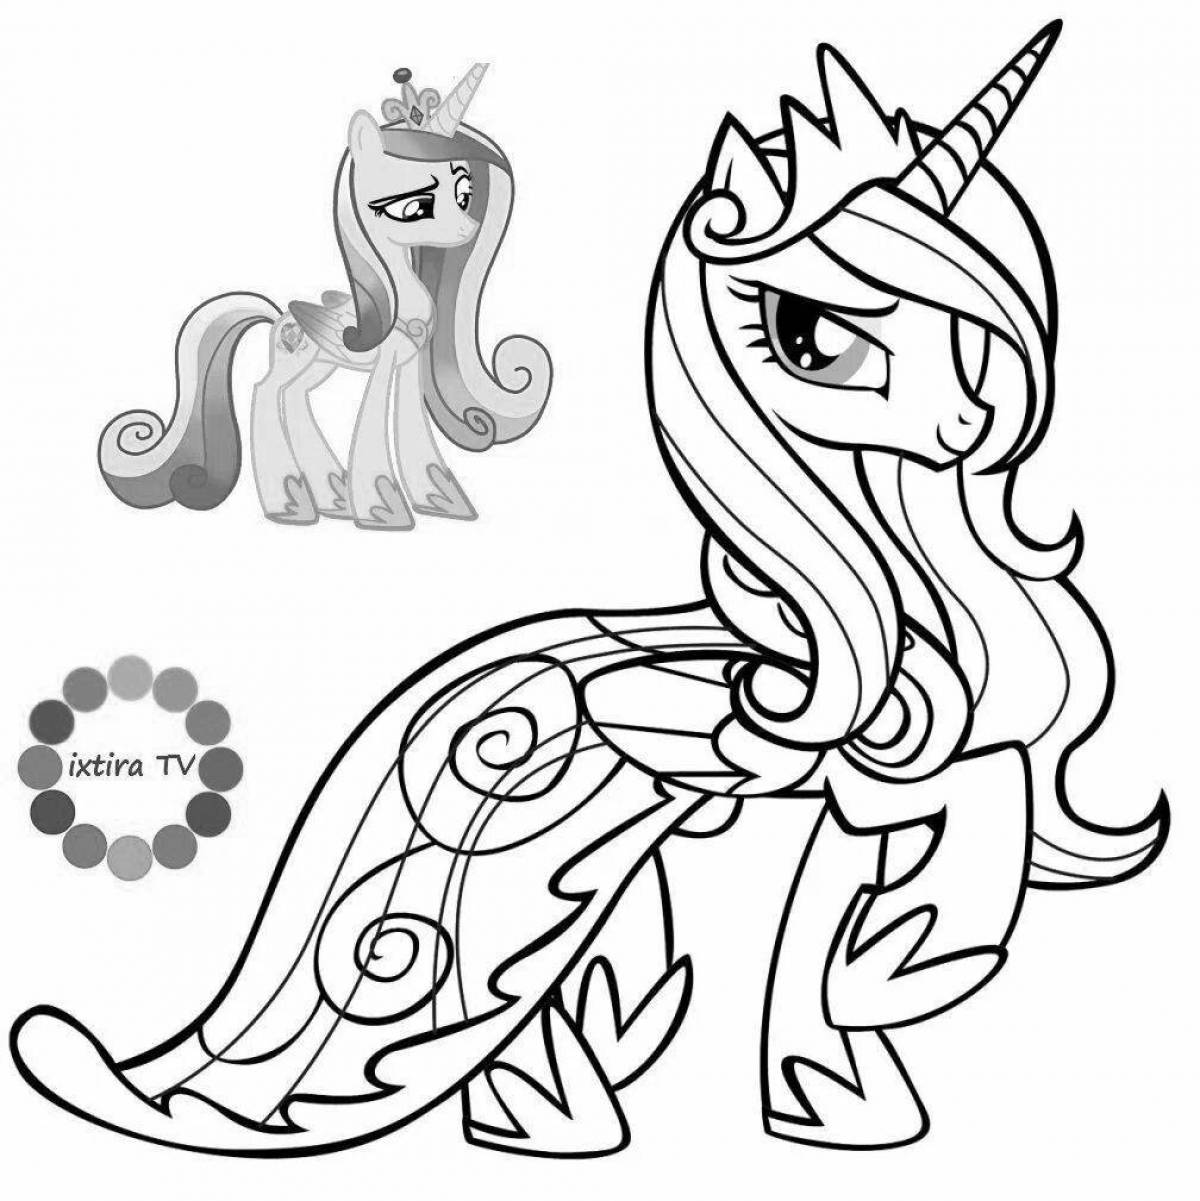 Funny cadence pony coloring book